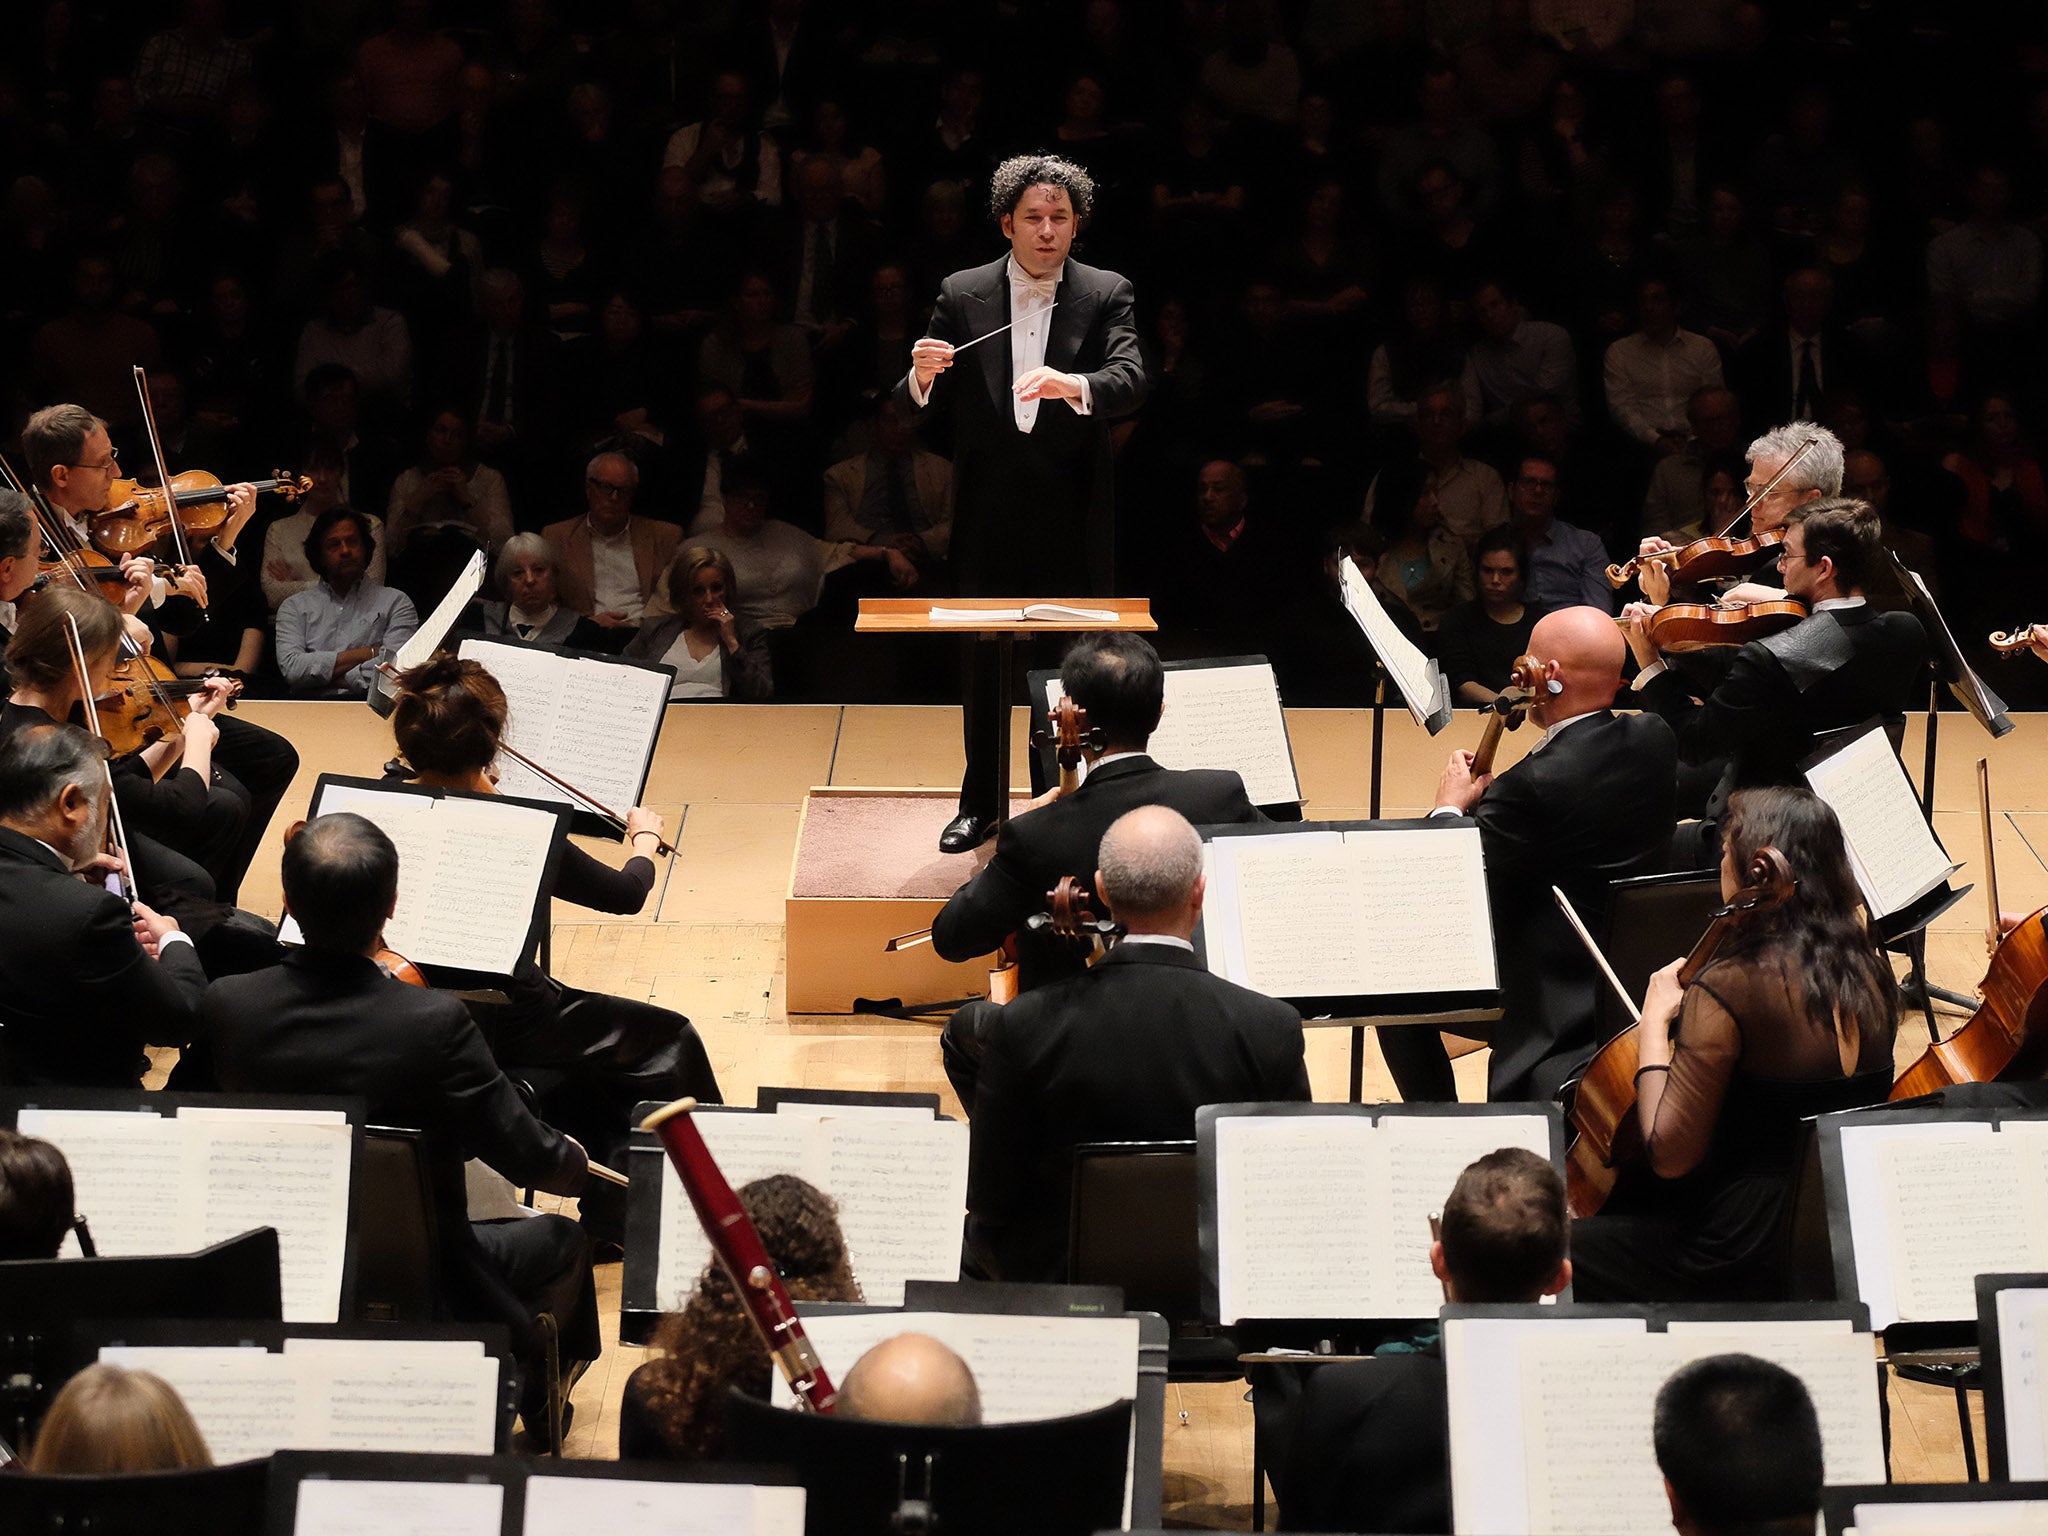 Gustavo Dudamel conducts the Los Angeles Philharmonic at the opening concert of their Barbican residency.